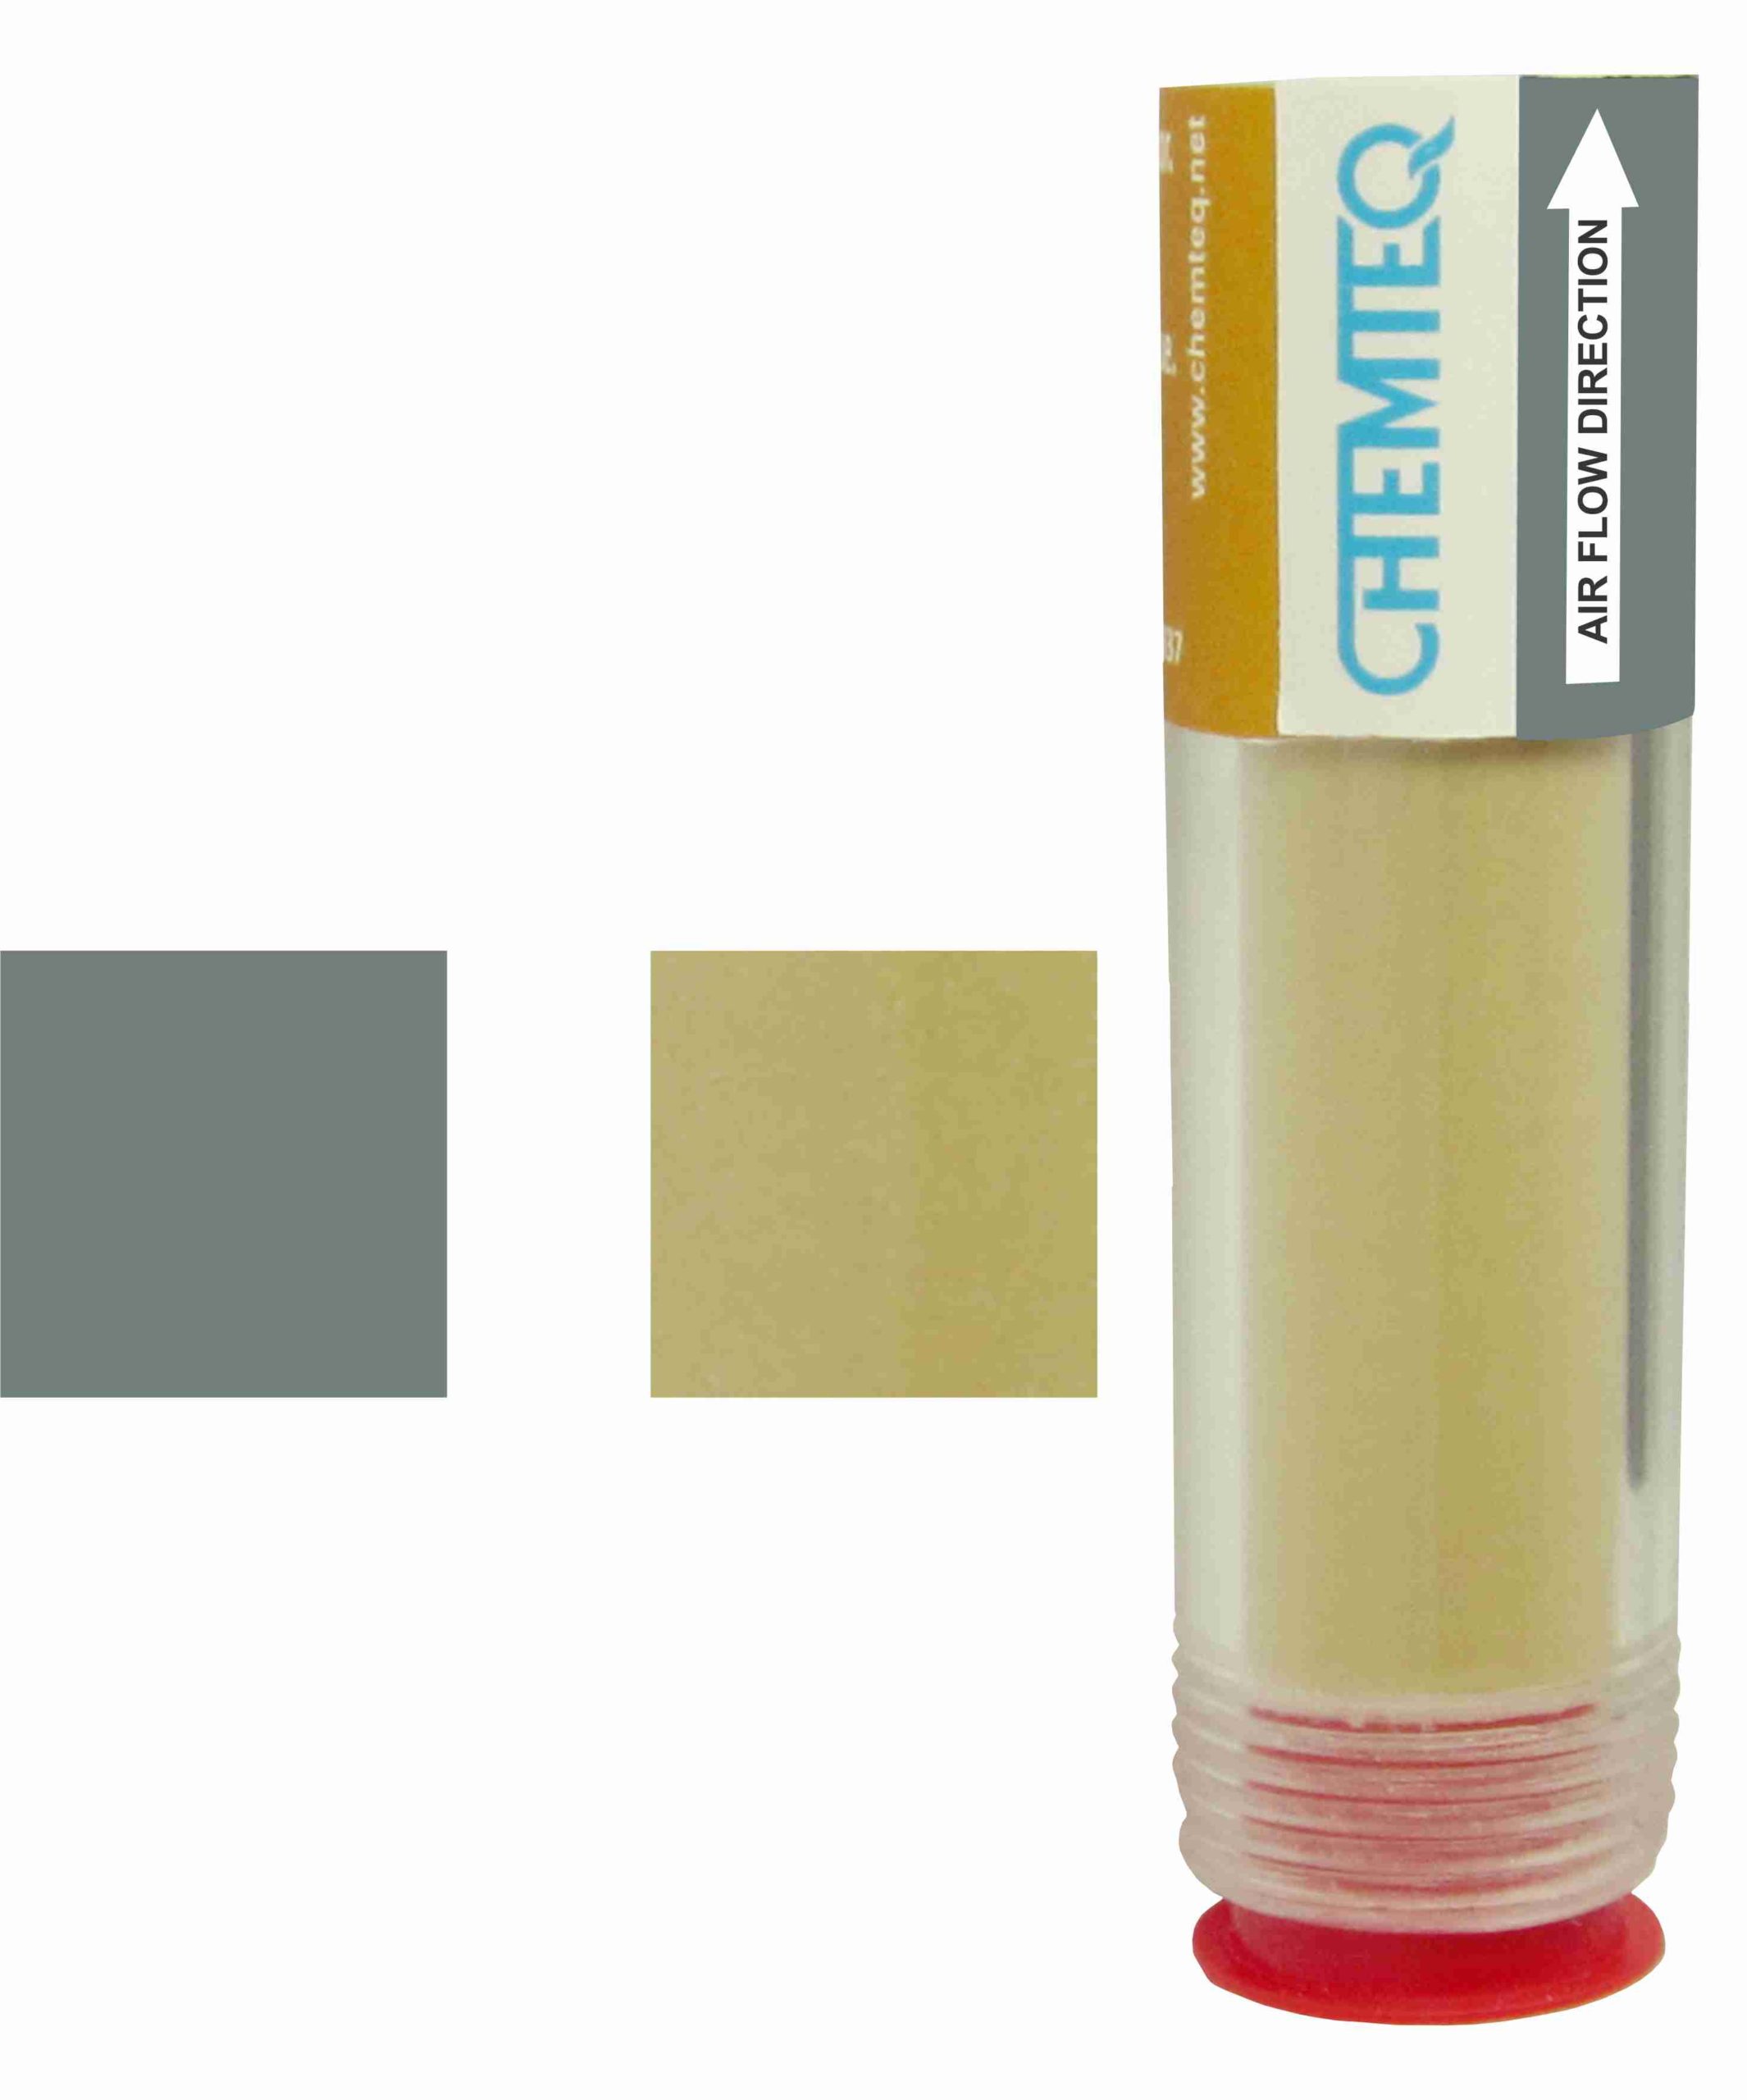 Glutaraldehyde Filter Change Indicator. Direct read and real time indication of glutaraldehyde. Reliable and cost effective.